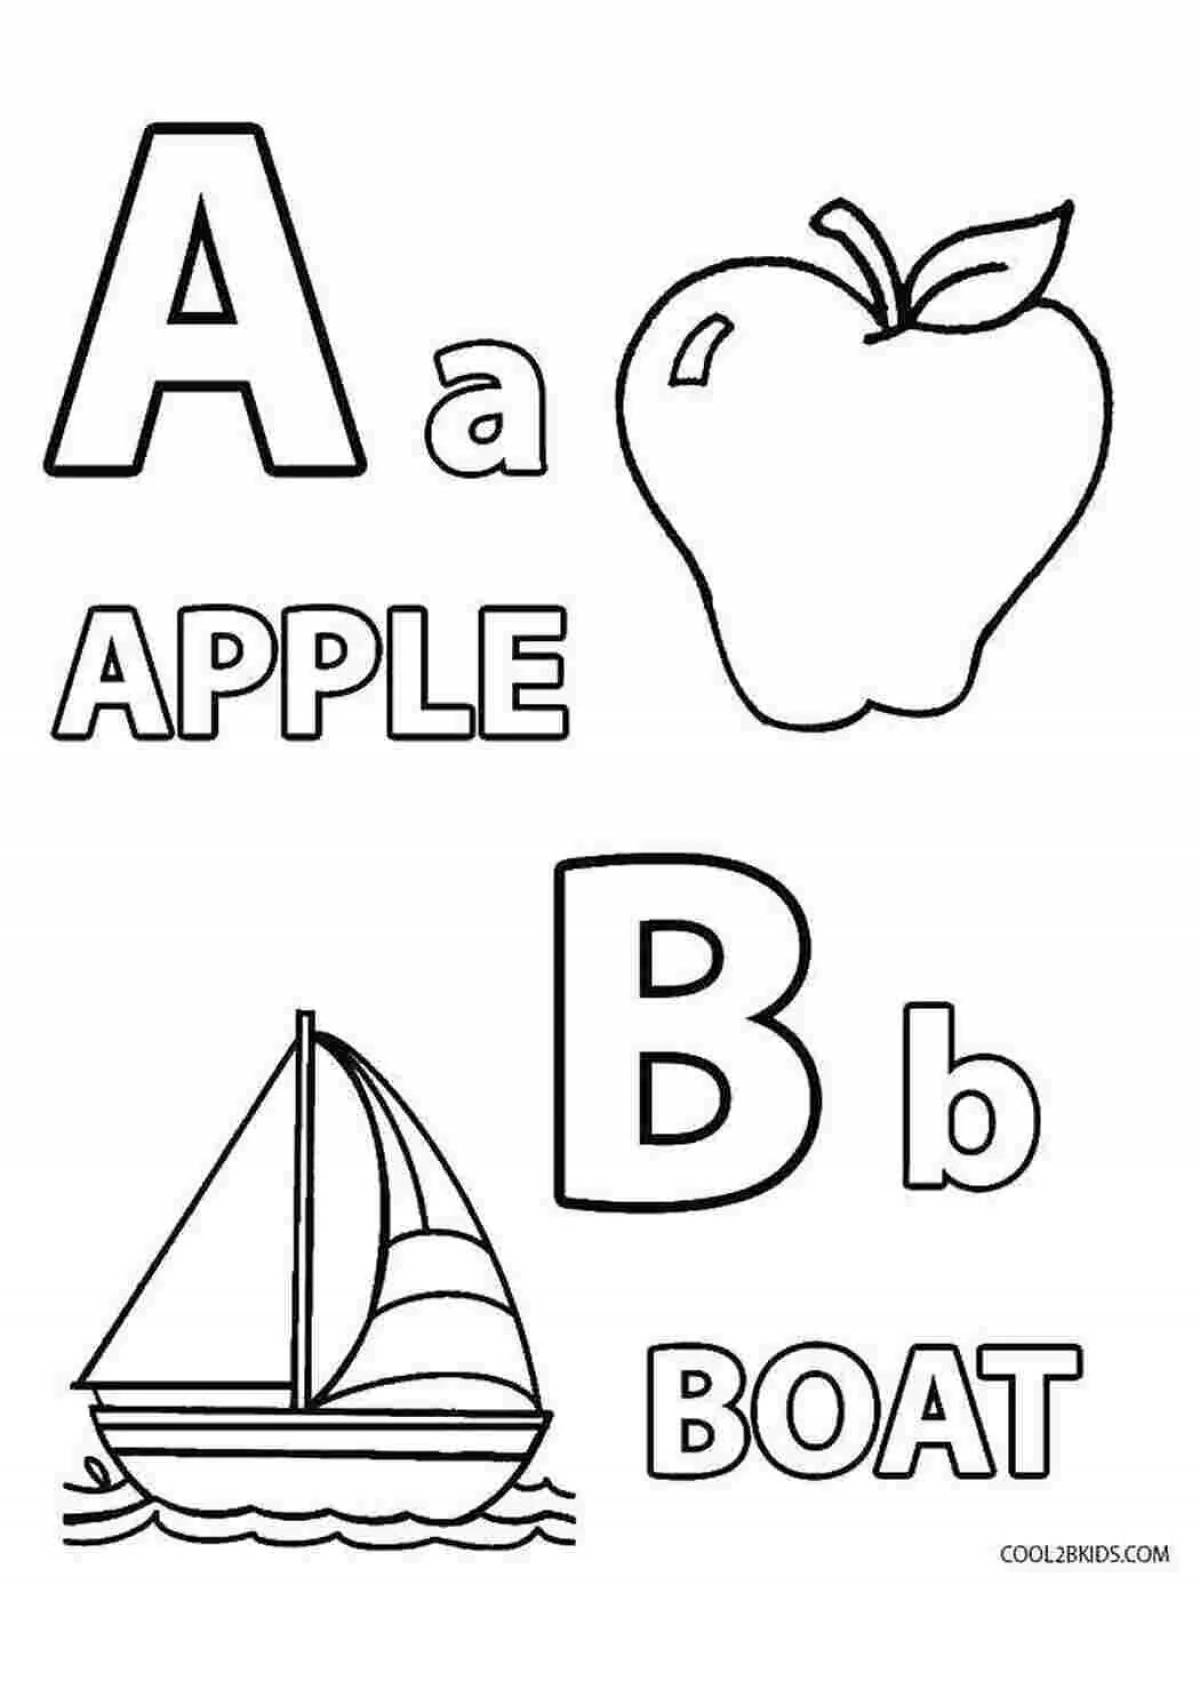 Colorful laura alphabet coloring page for young learners